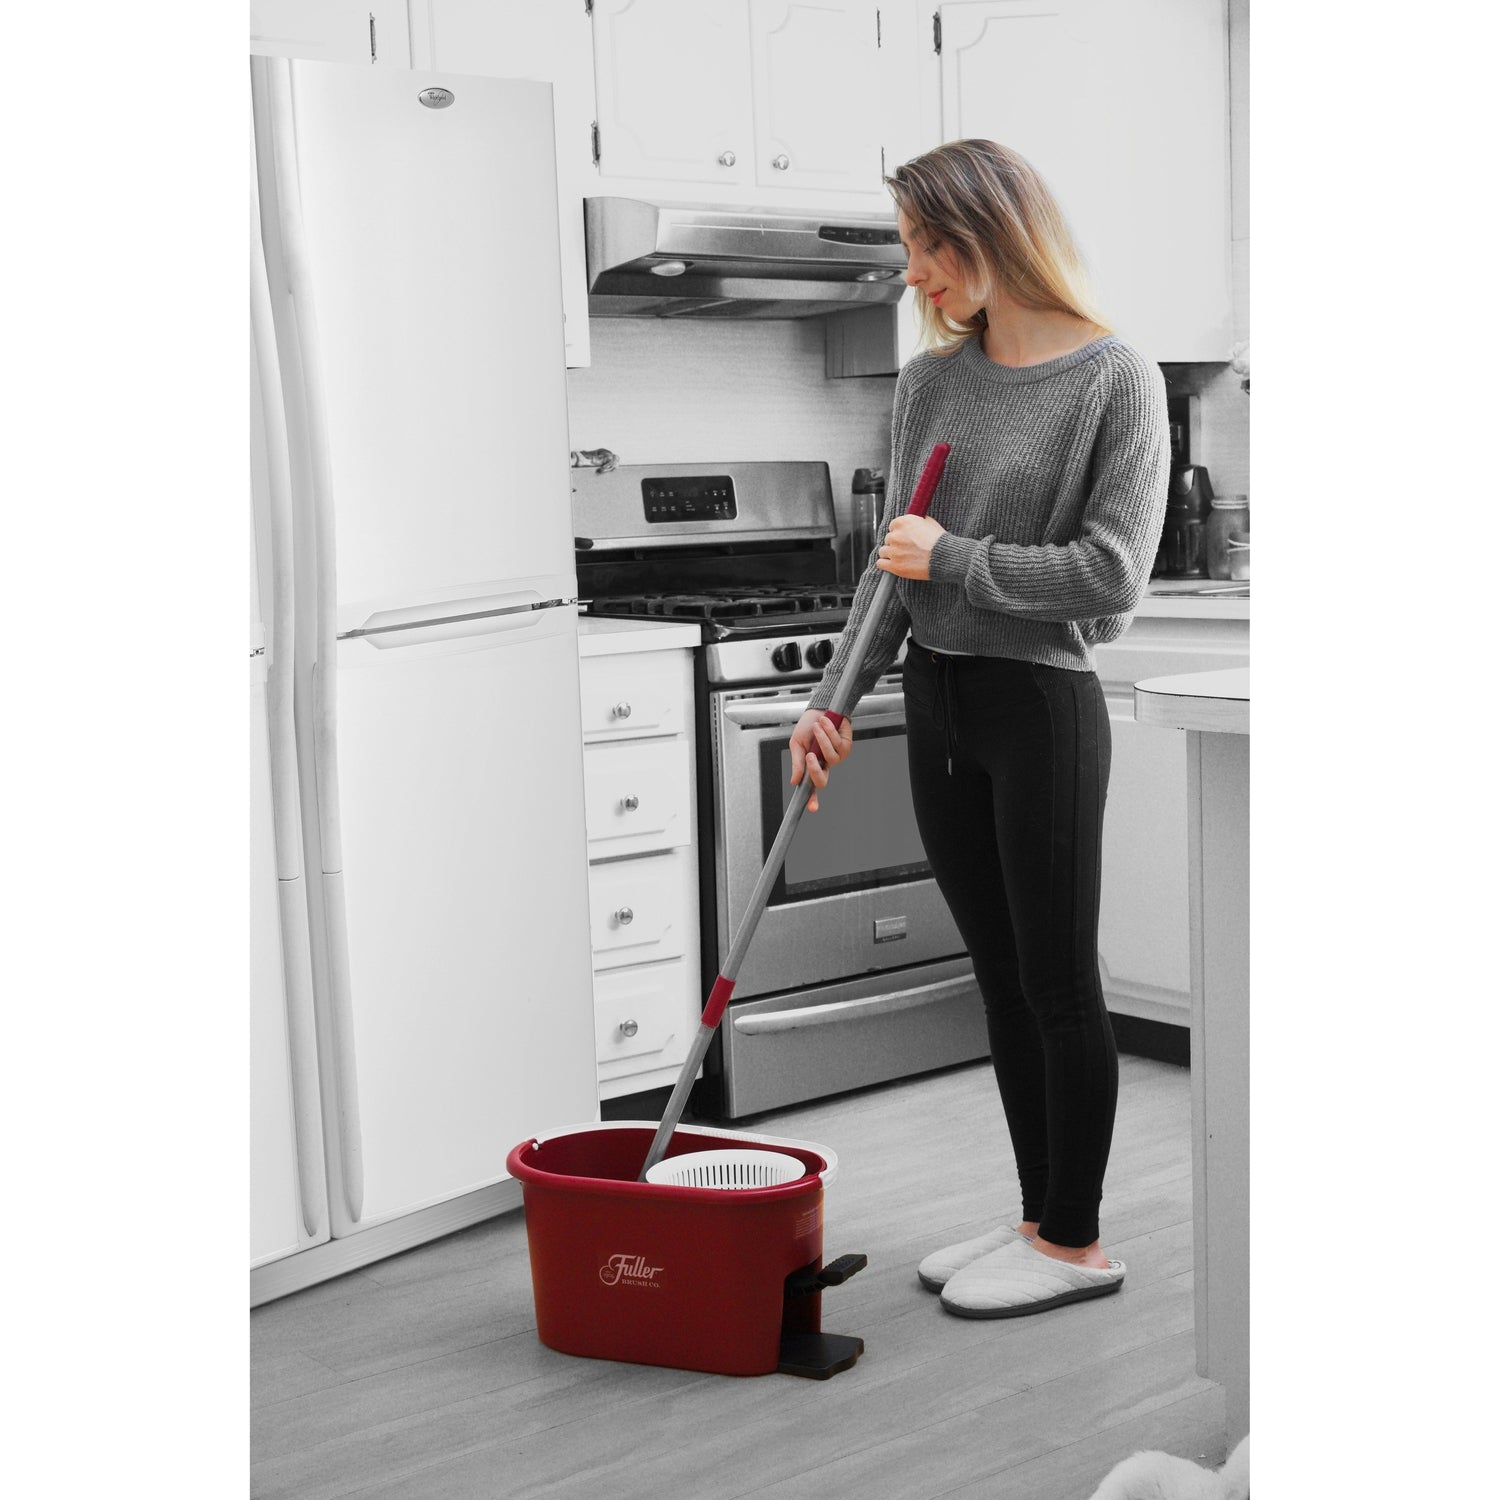 Home Focus premium quality Spin Mop, Bucket Floor Cleaning, Floor Cleaning  Mop with Bucket and 2